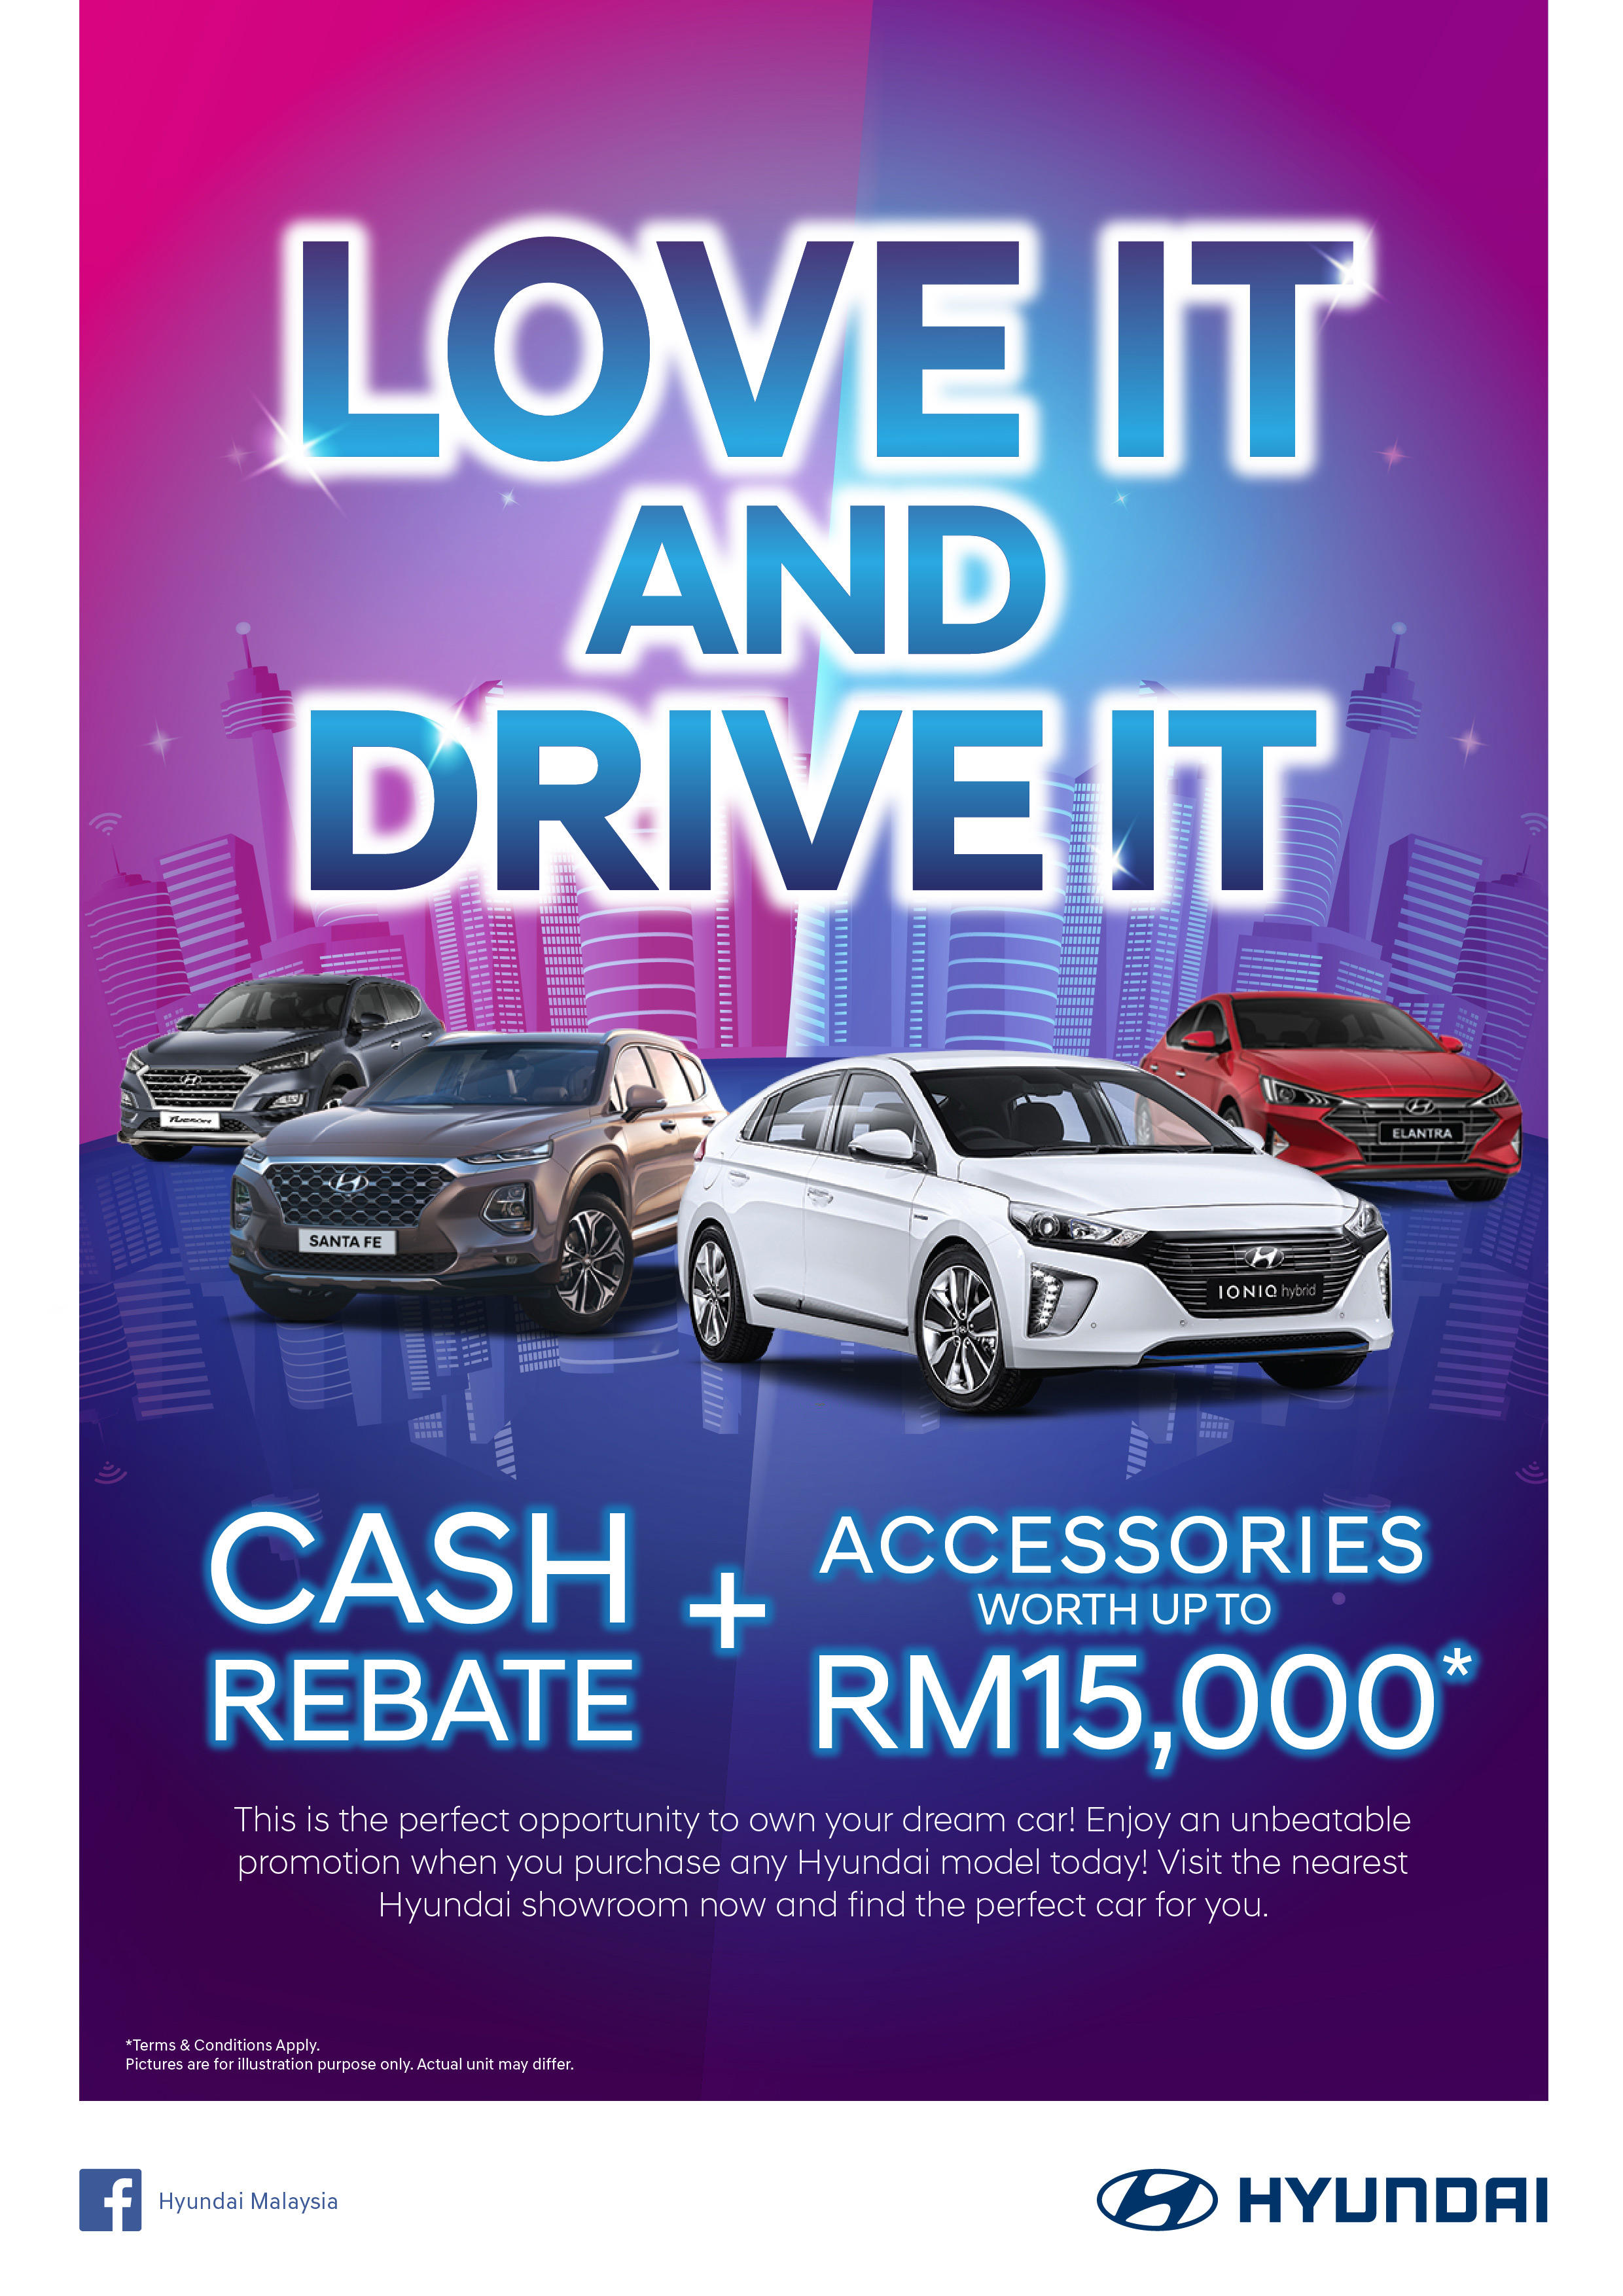 Love it and Drive it | Cash Rebate + Accessoriess worth up to RM15,000*